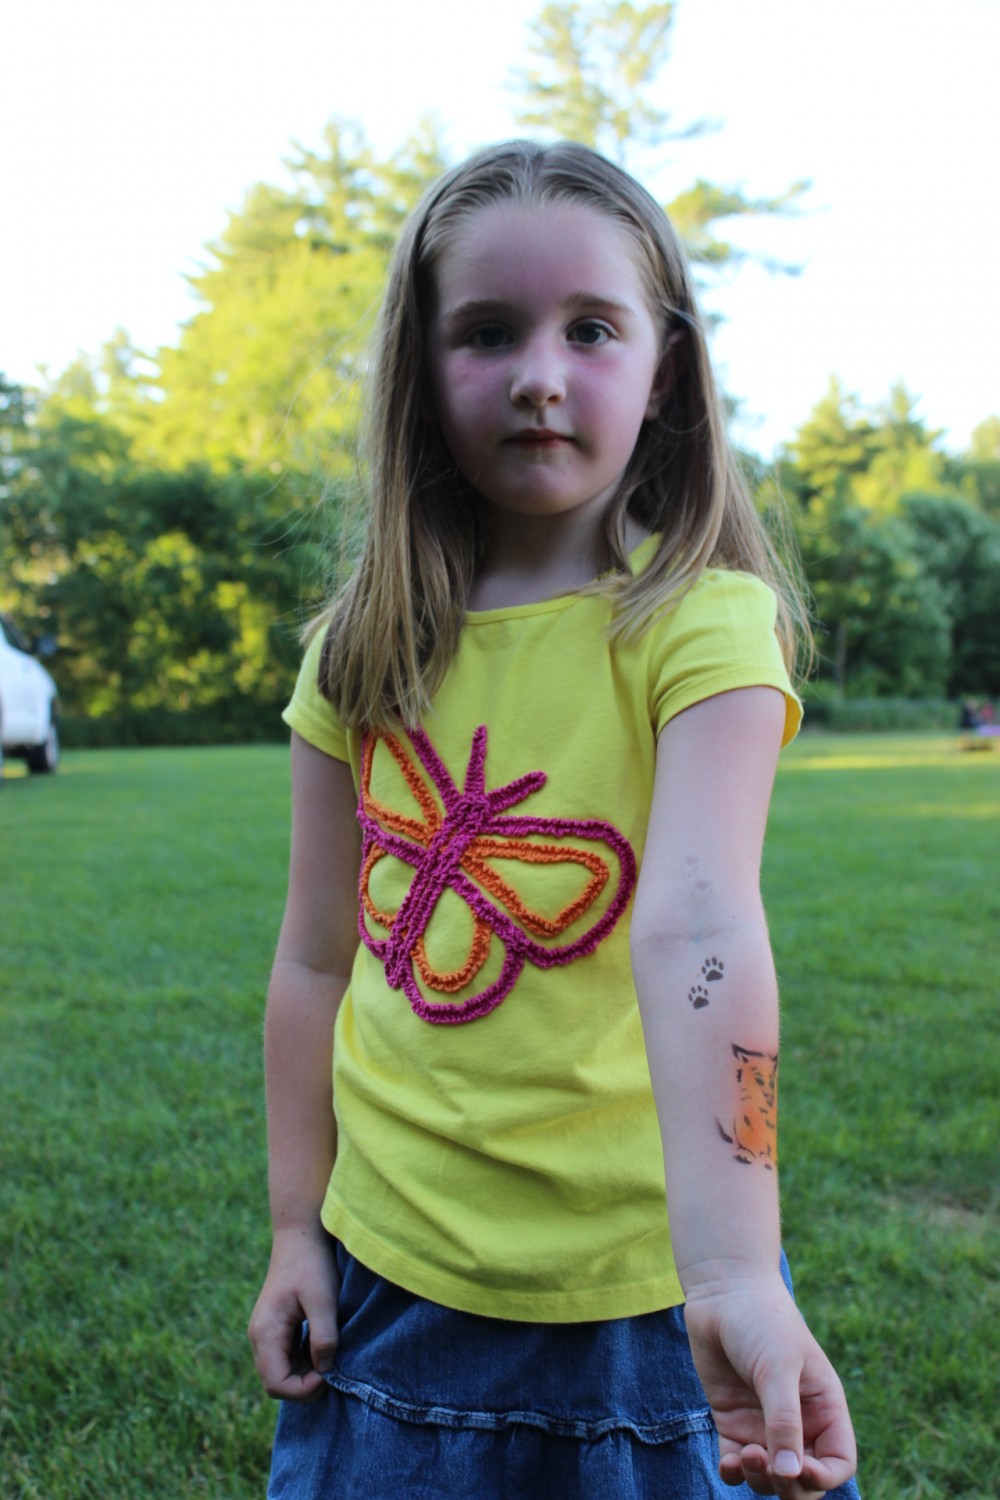 Showing off her awesome airbrush tattoos at Canton Parks on 6/26/22!